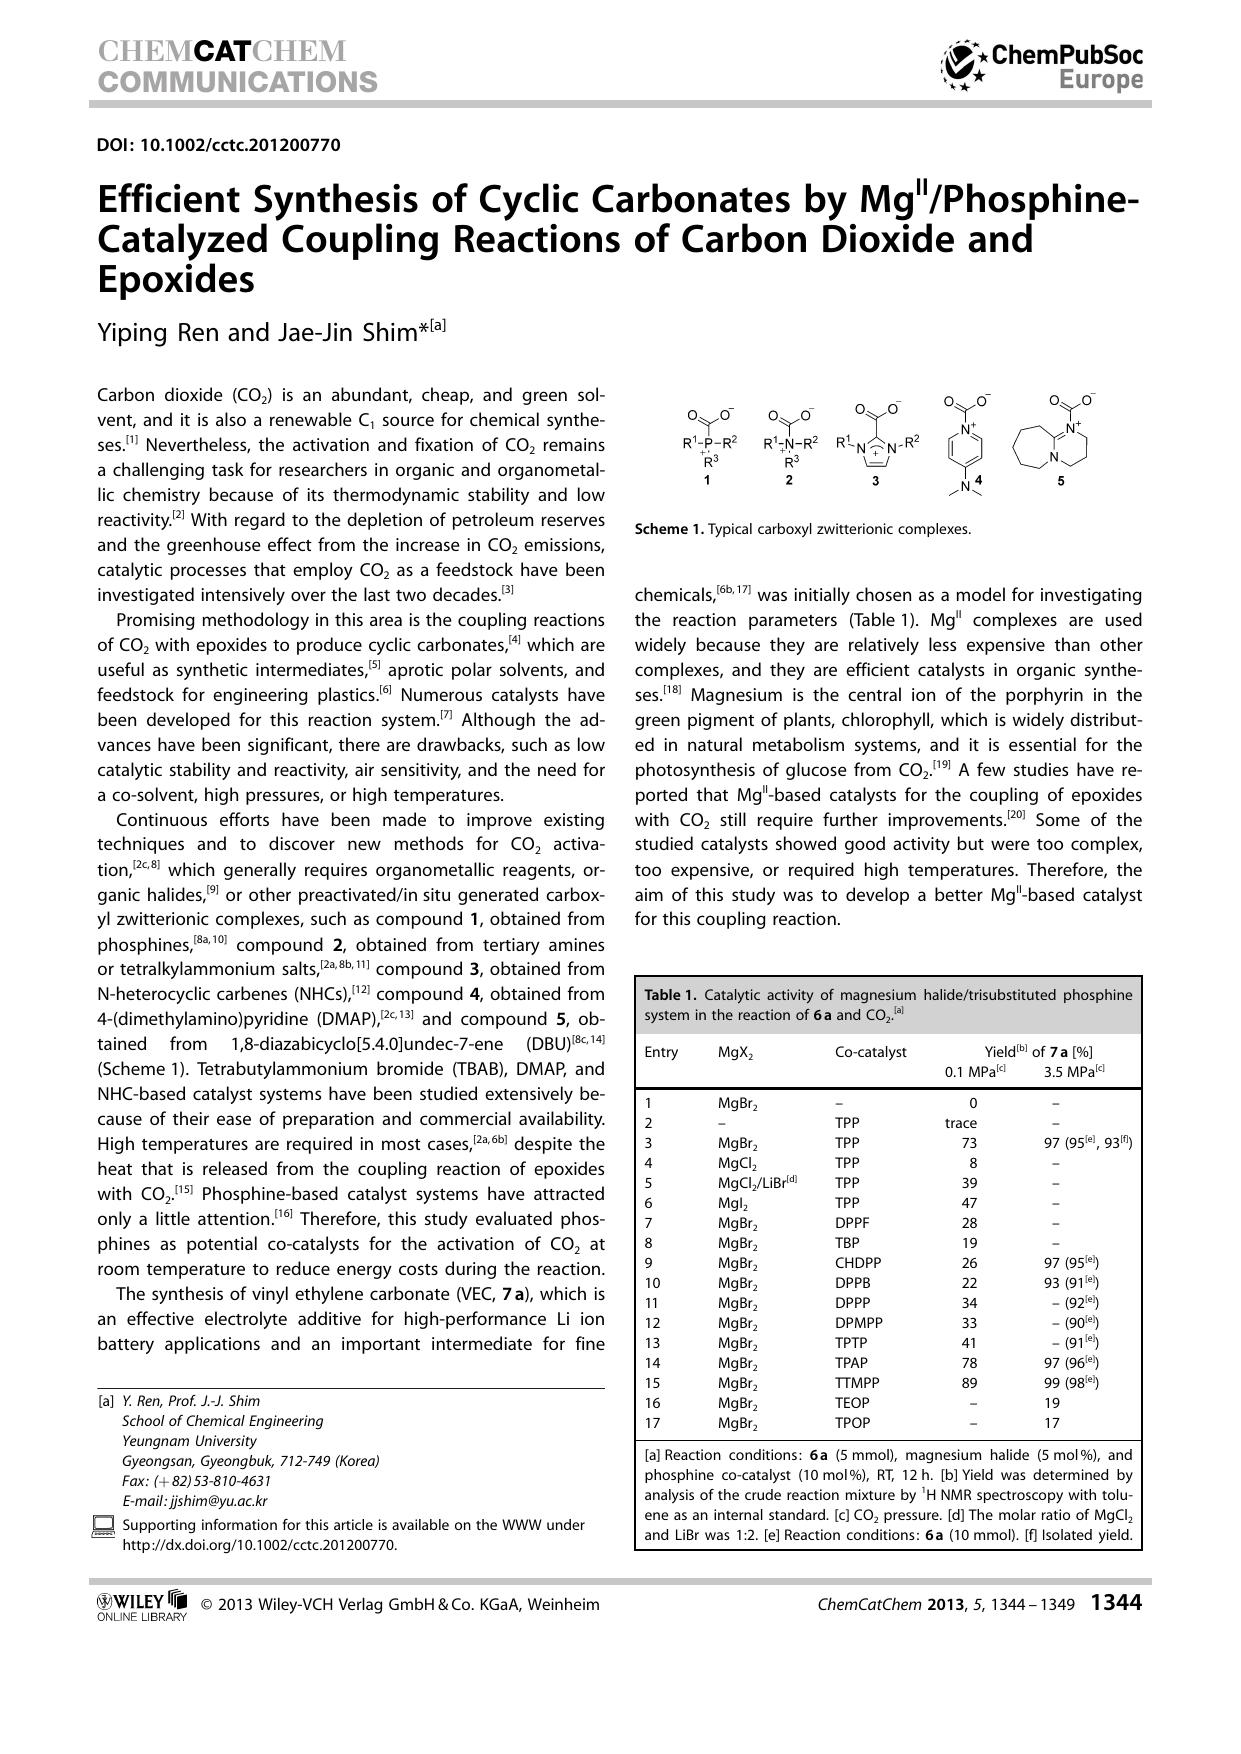 Efficient Synthesis of Cyclic Carbonates by MgIIPhosphineCatalyzed Coupling Reactions of Carbon Dioxide and Epoxides by Unknown